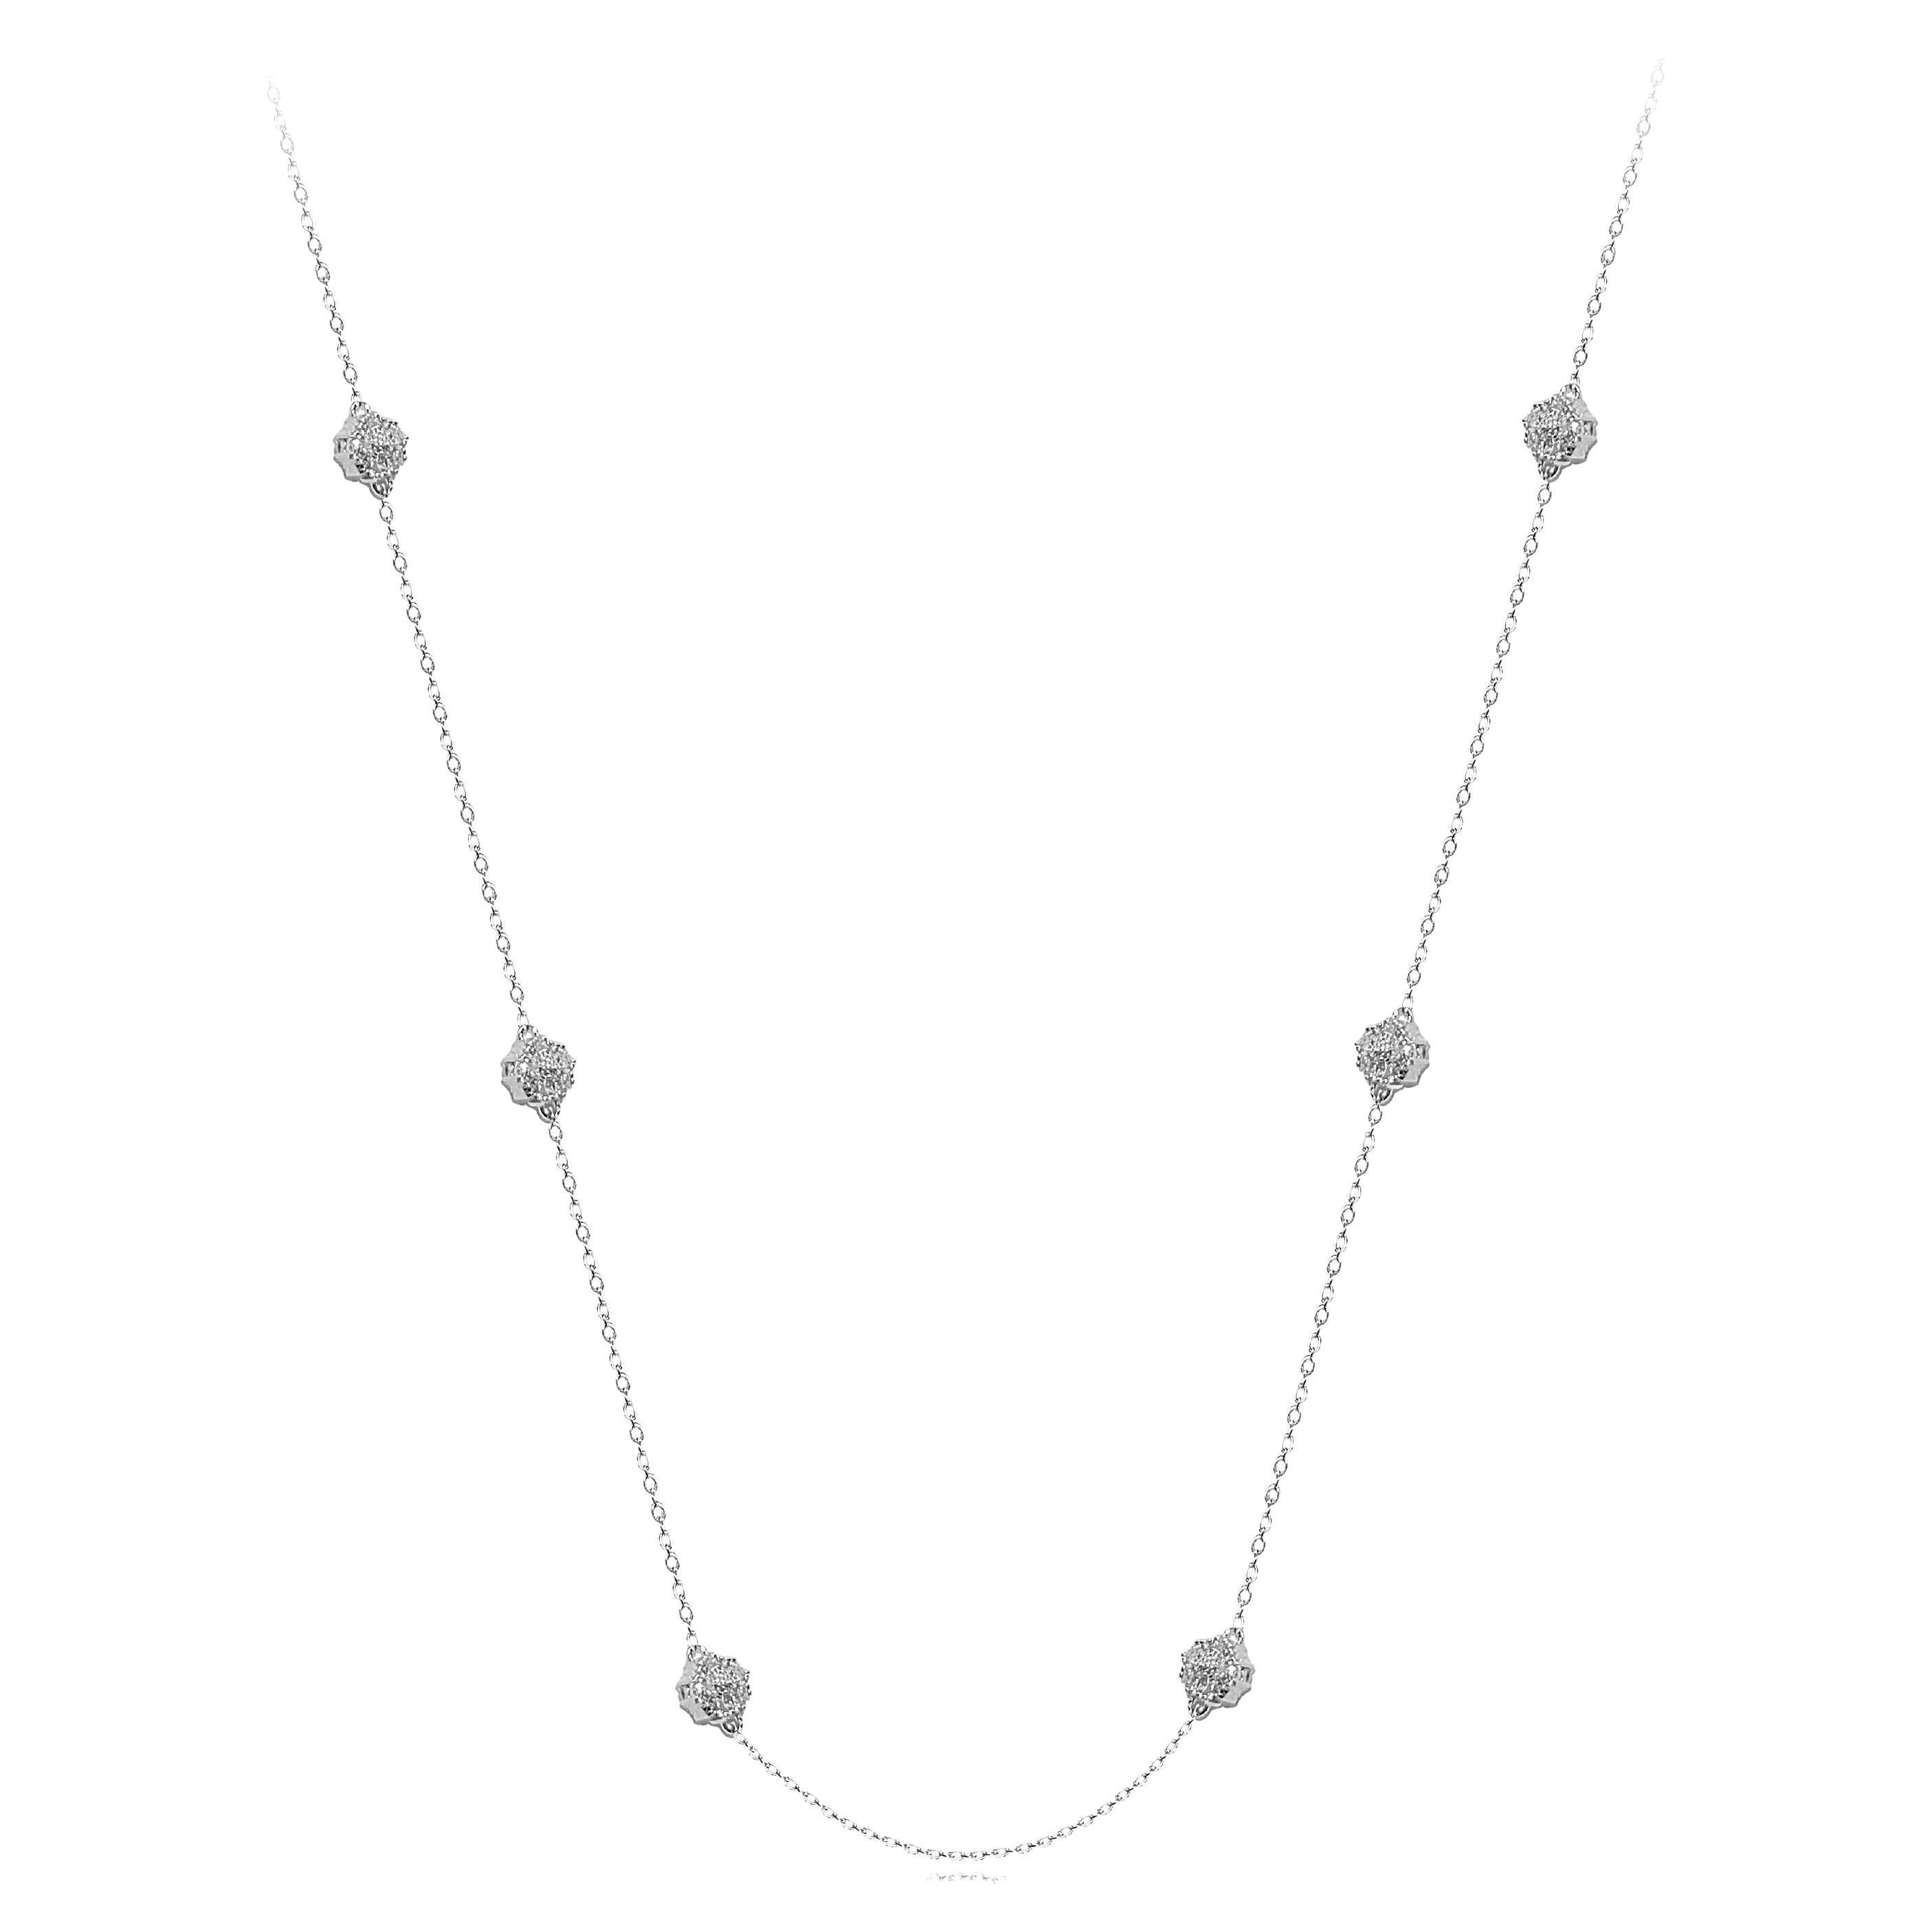 Small Doublesided Blossom Chain Necklace